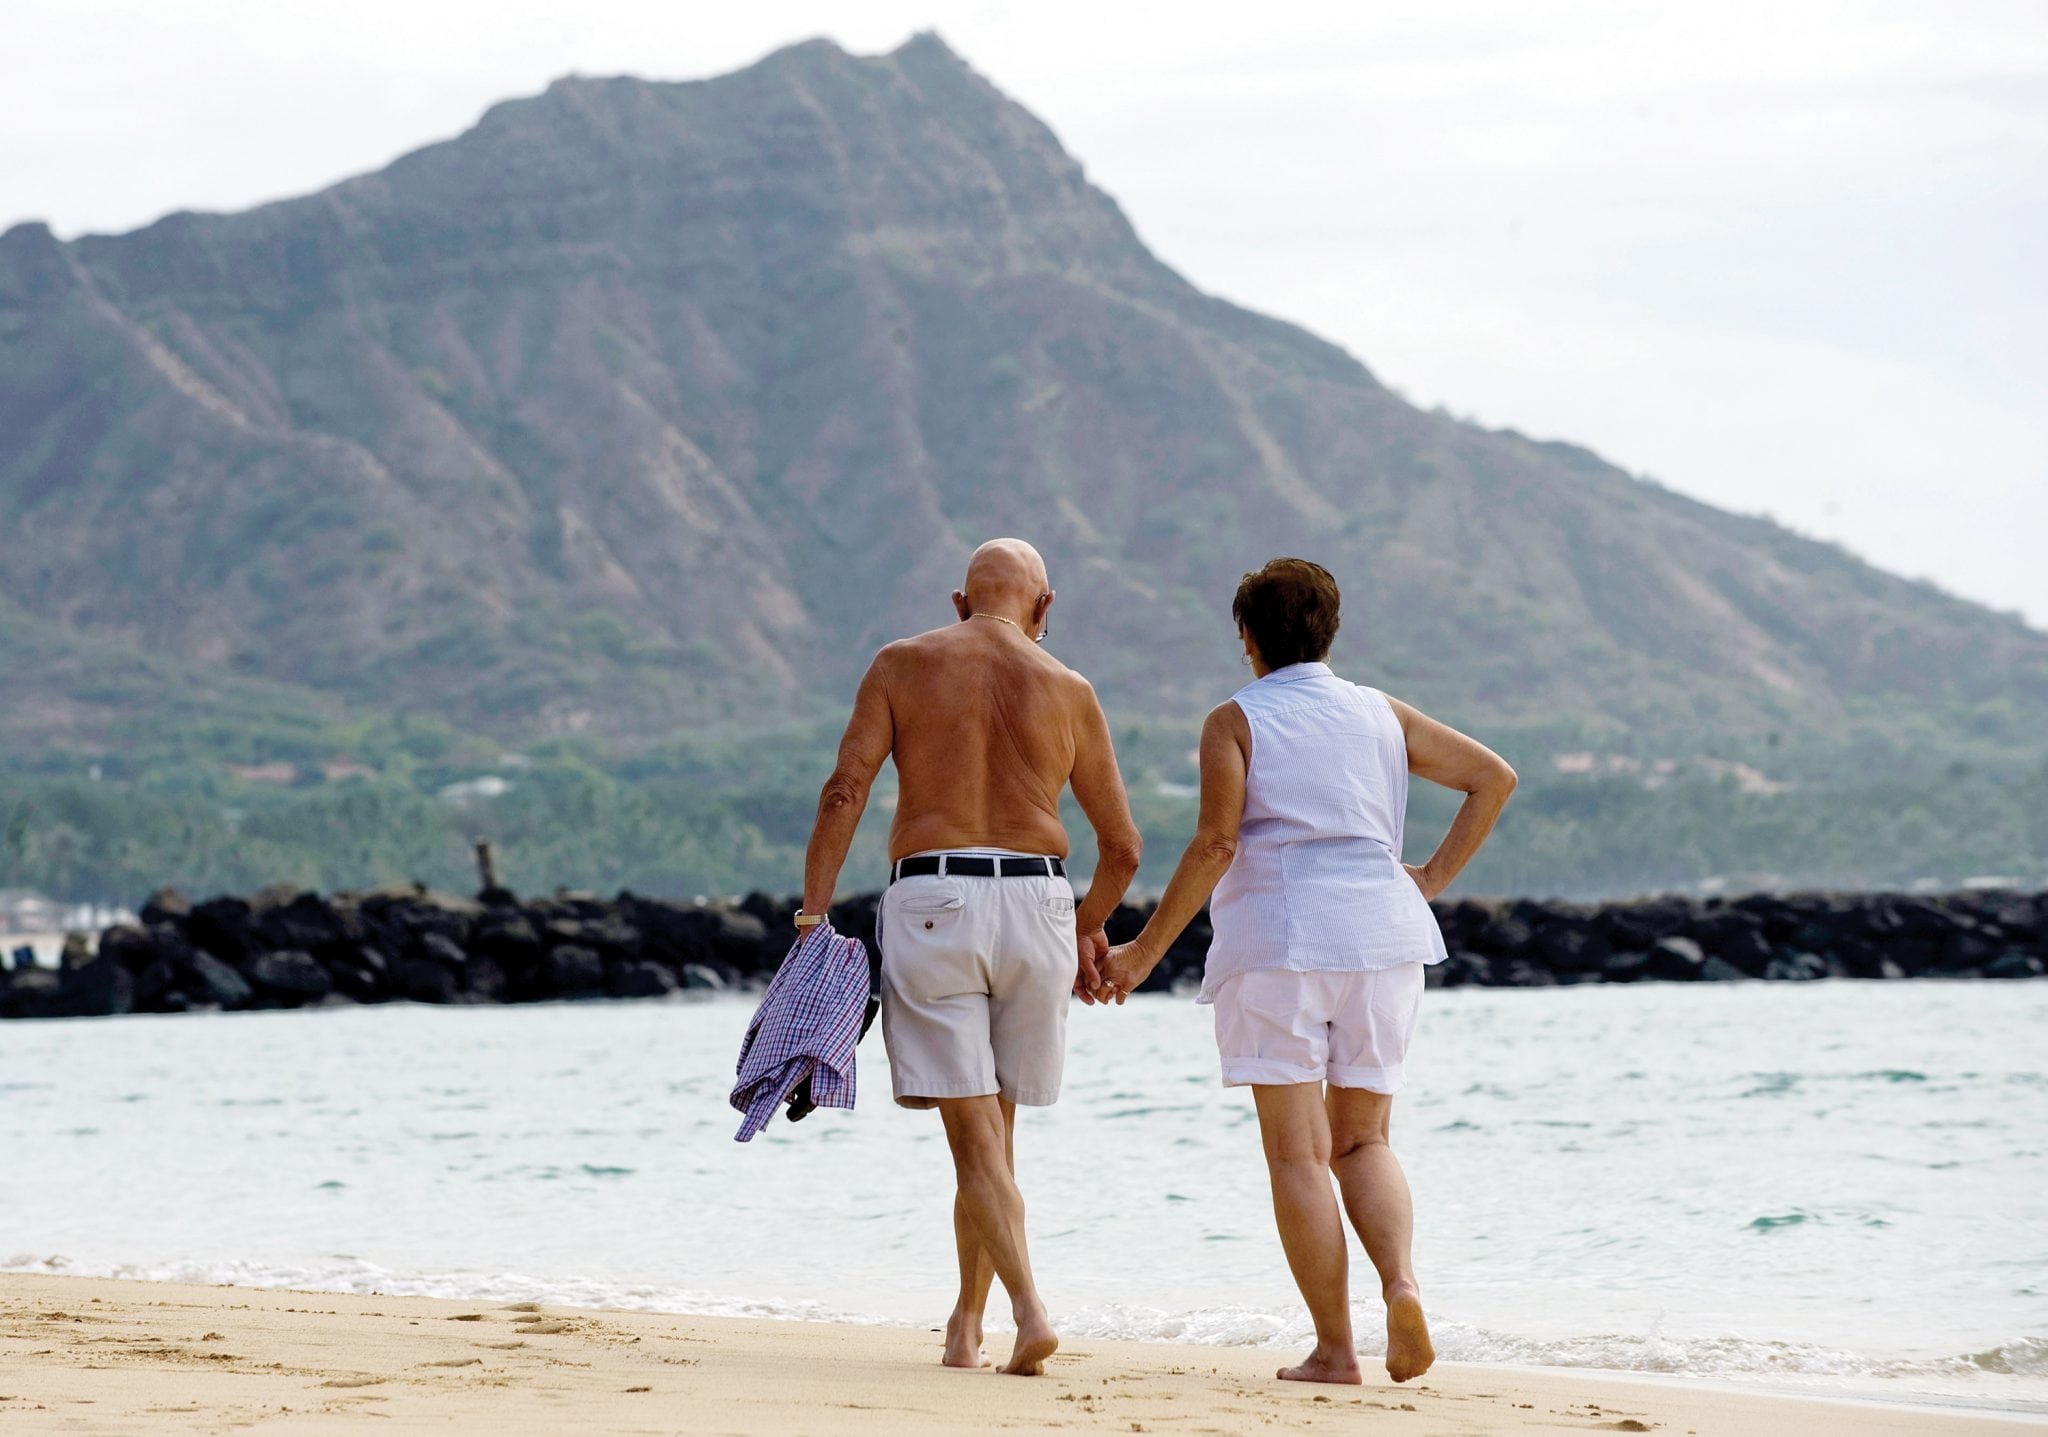 A quiet walk under the backdrop of Diamond Head is part of the experience of visiting Duke Kahanamoku Beach in Hawaii. 